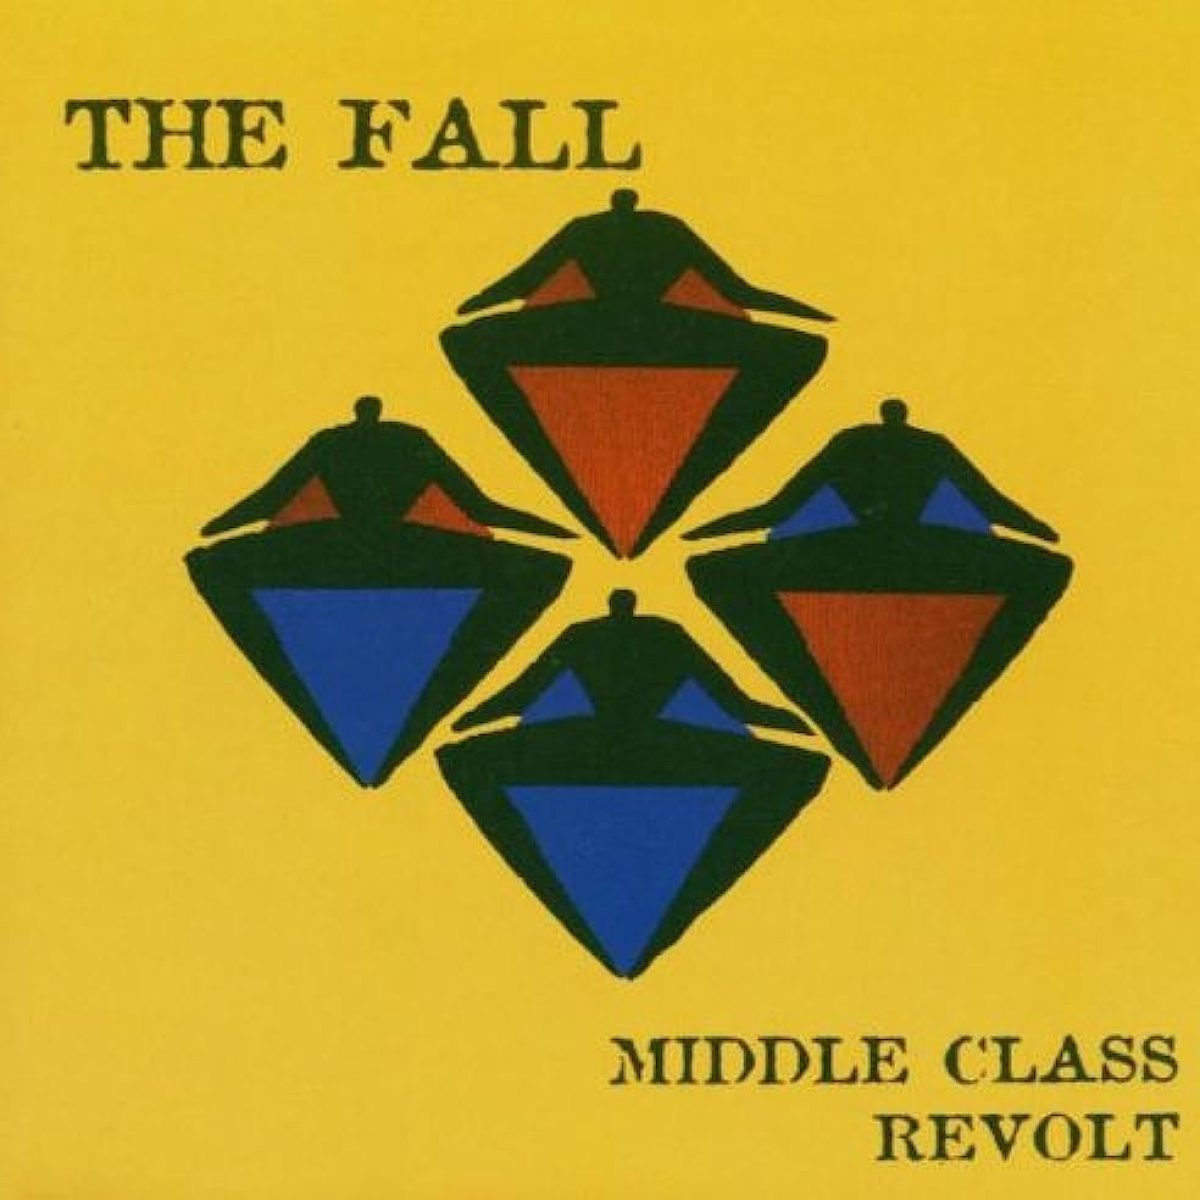 The Fall, Middle Class Revolt